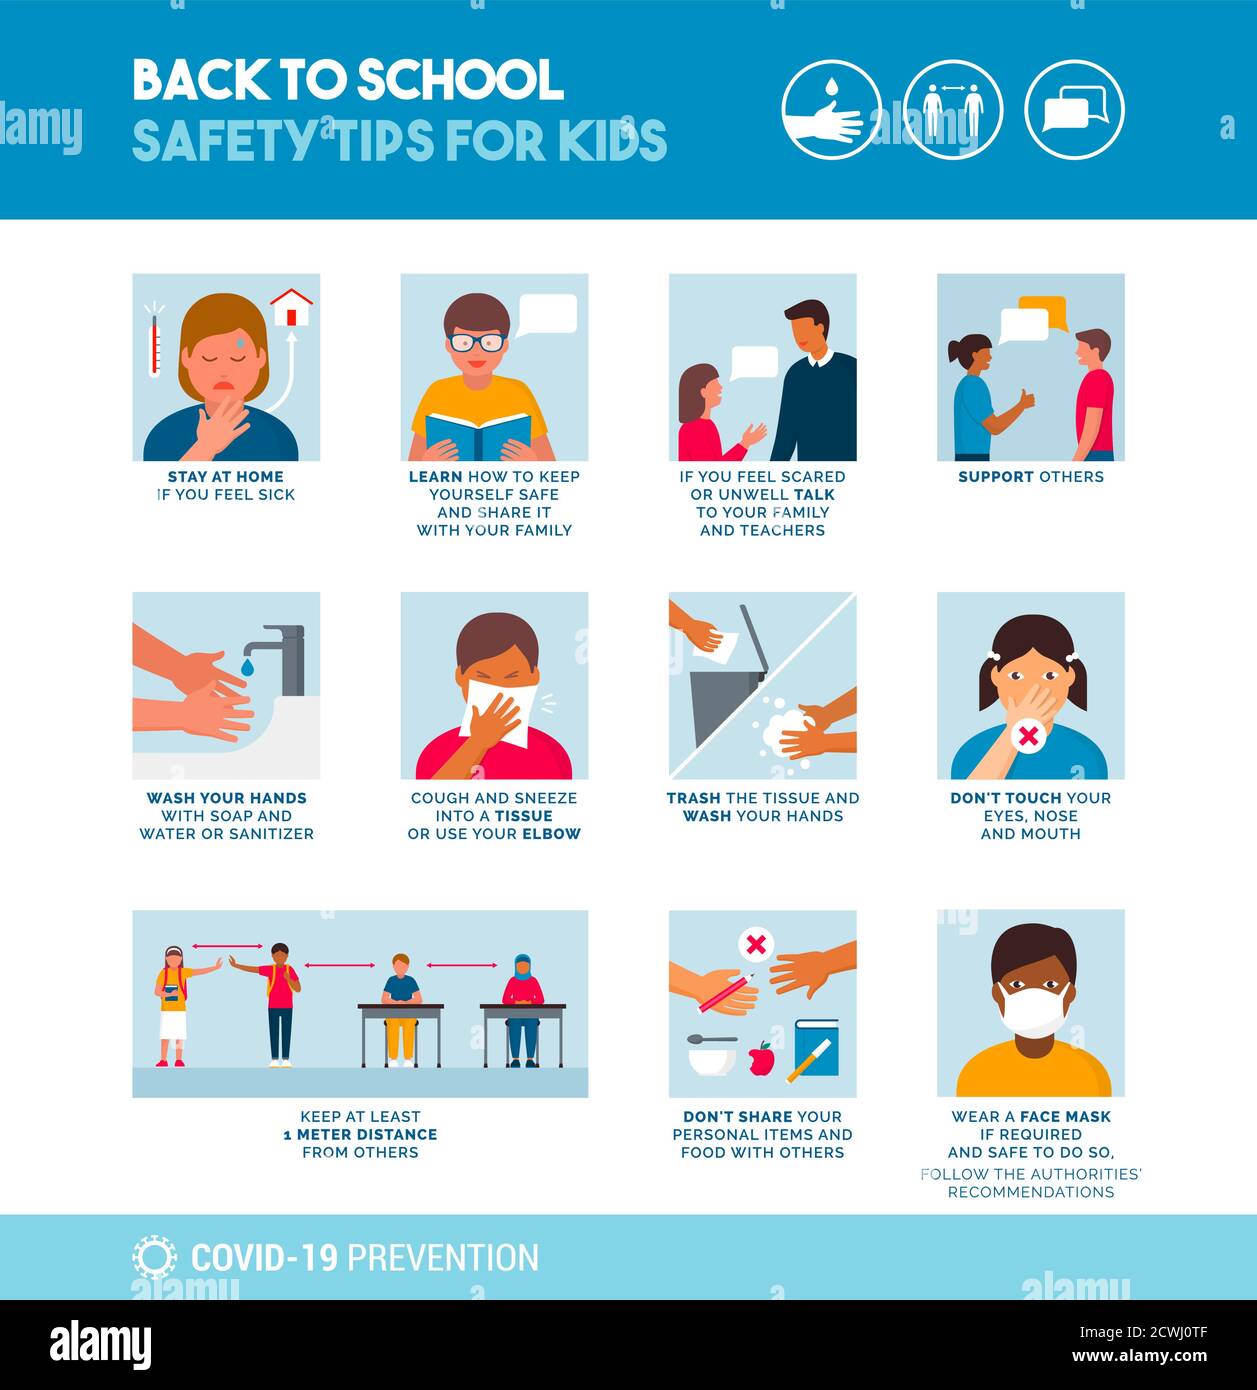 Back to school safety tips for kids poster: hygiene, social distancing and educational tips to prevent coronavirus covid-19 spread Stock Vector